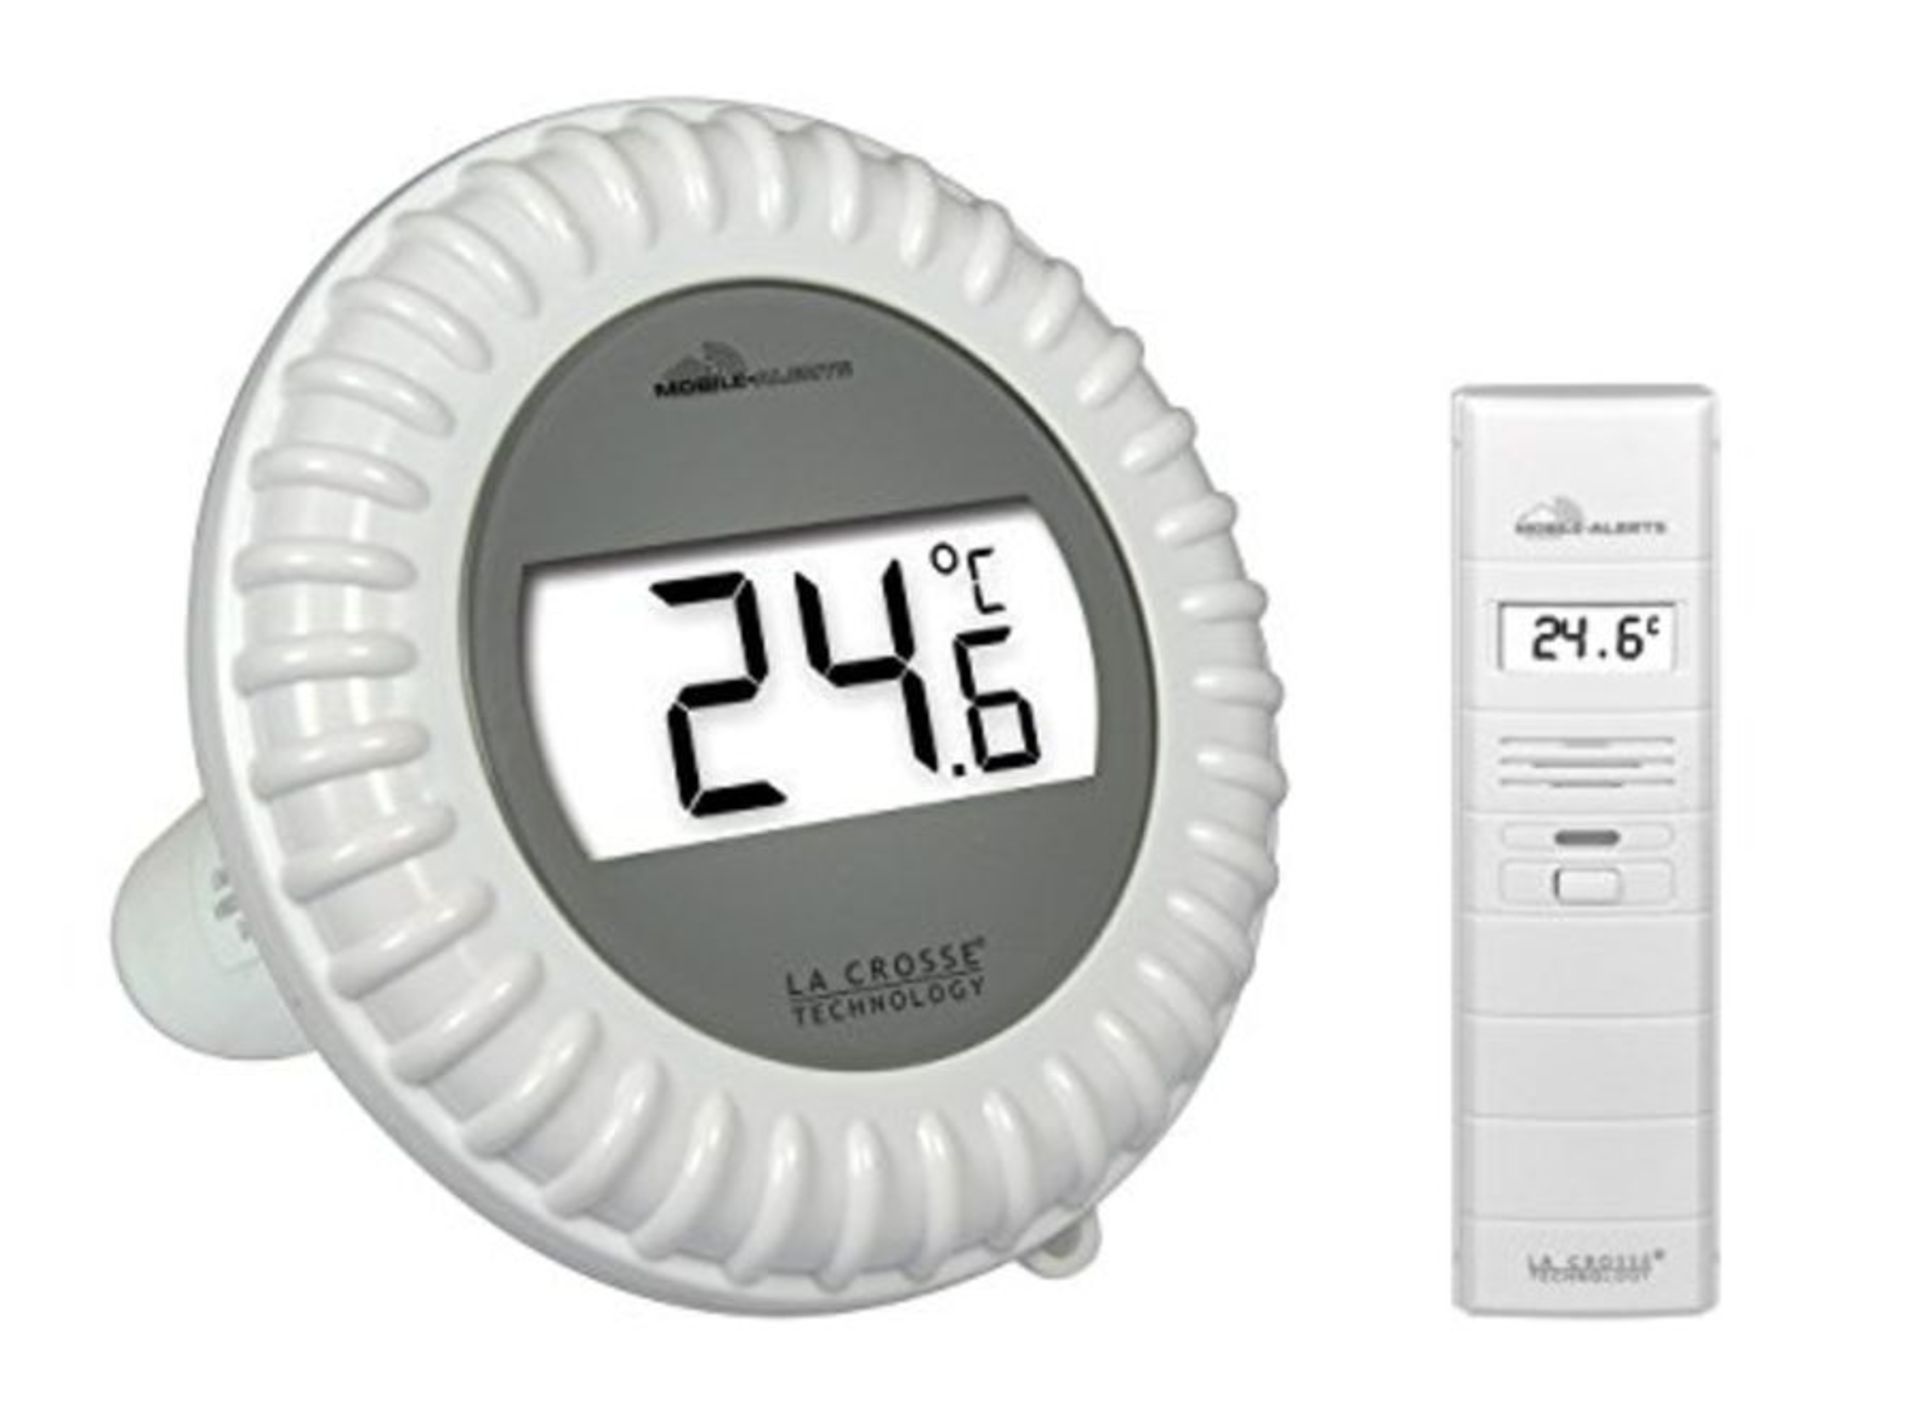 La Crosse Technology - MA10700 Mobile Alerts Connected Pool Kit containing a pool temp